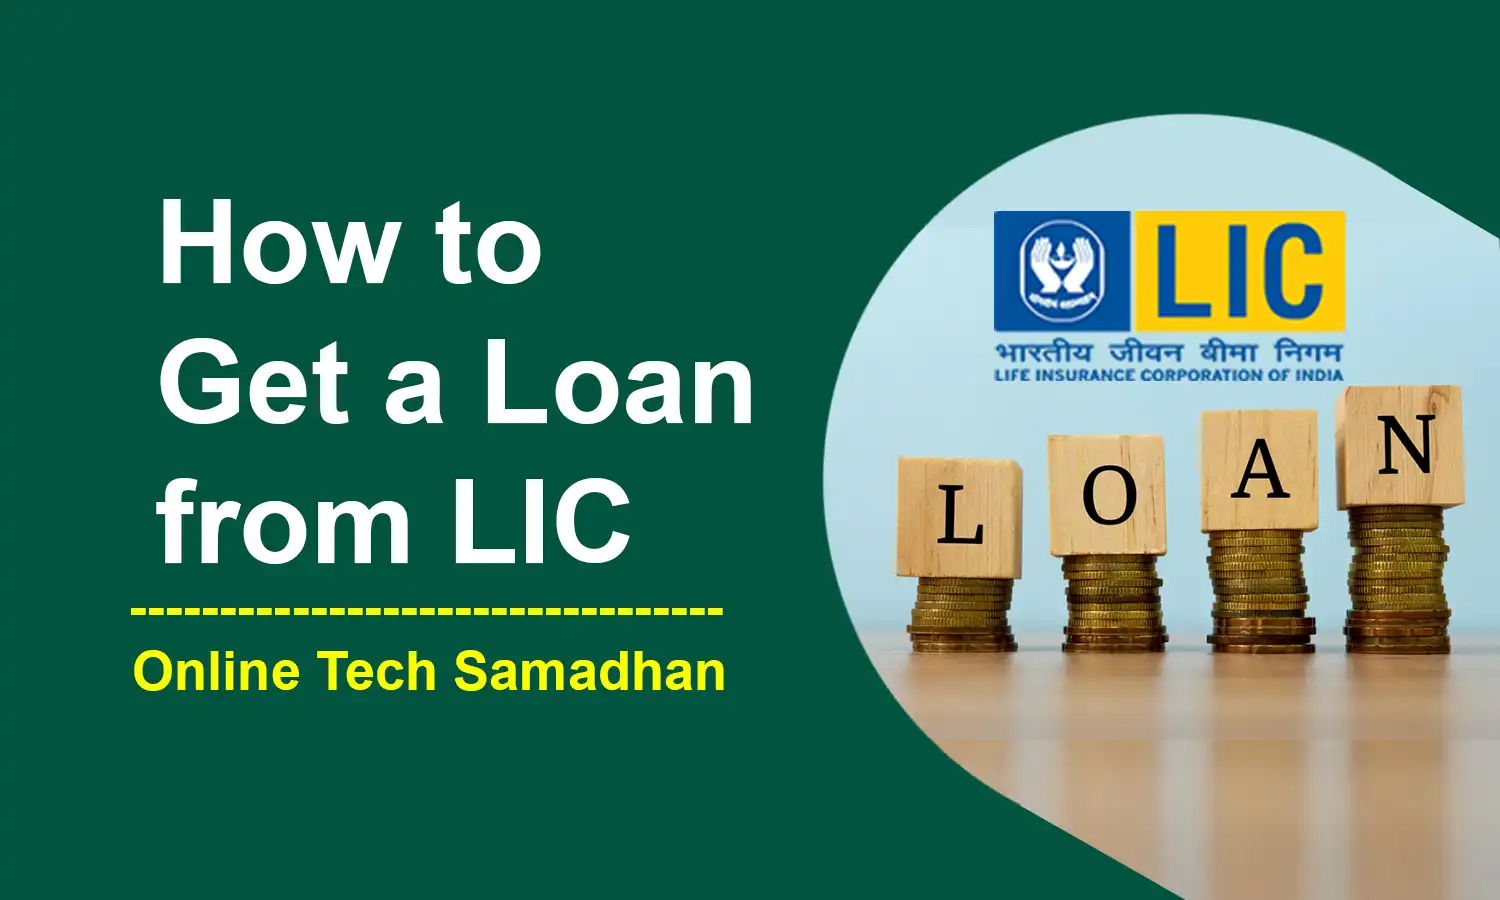 How to Get a Loan from LIC